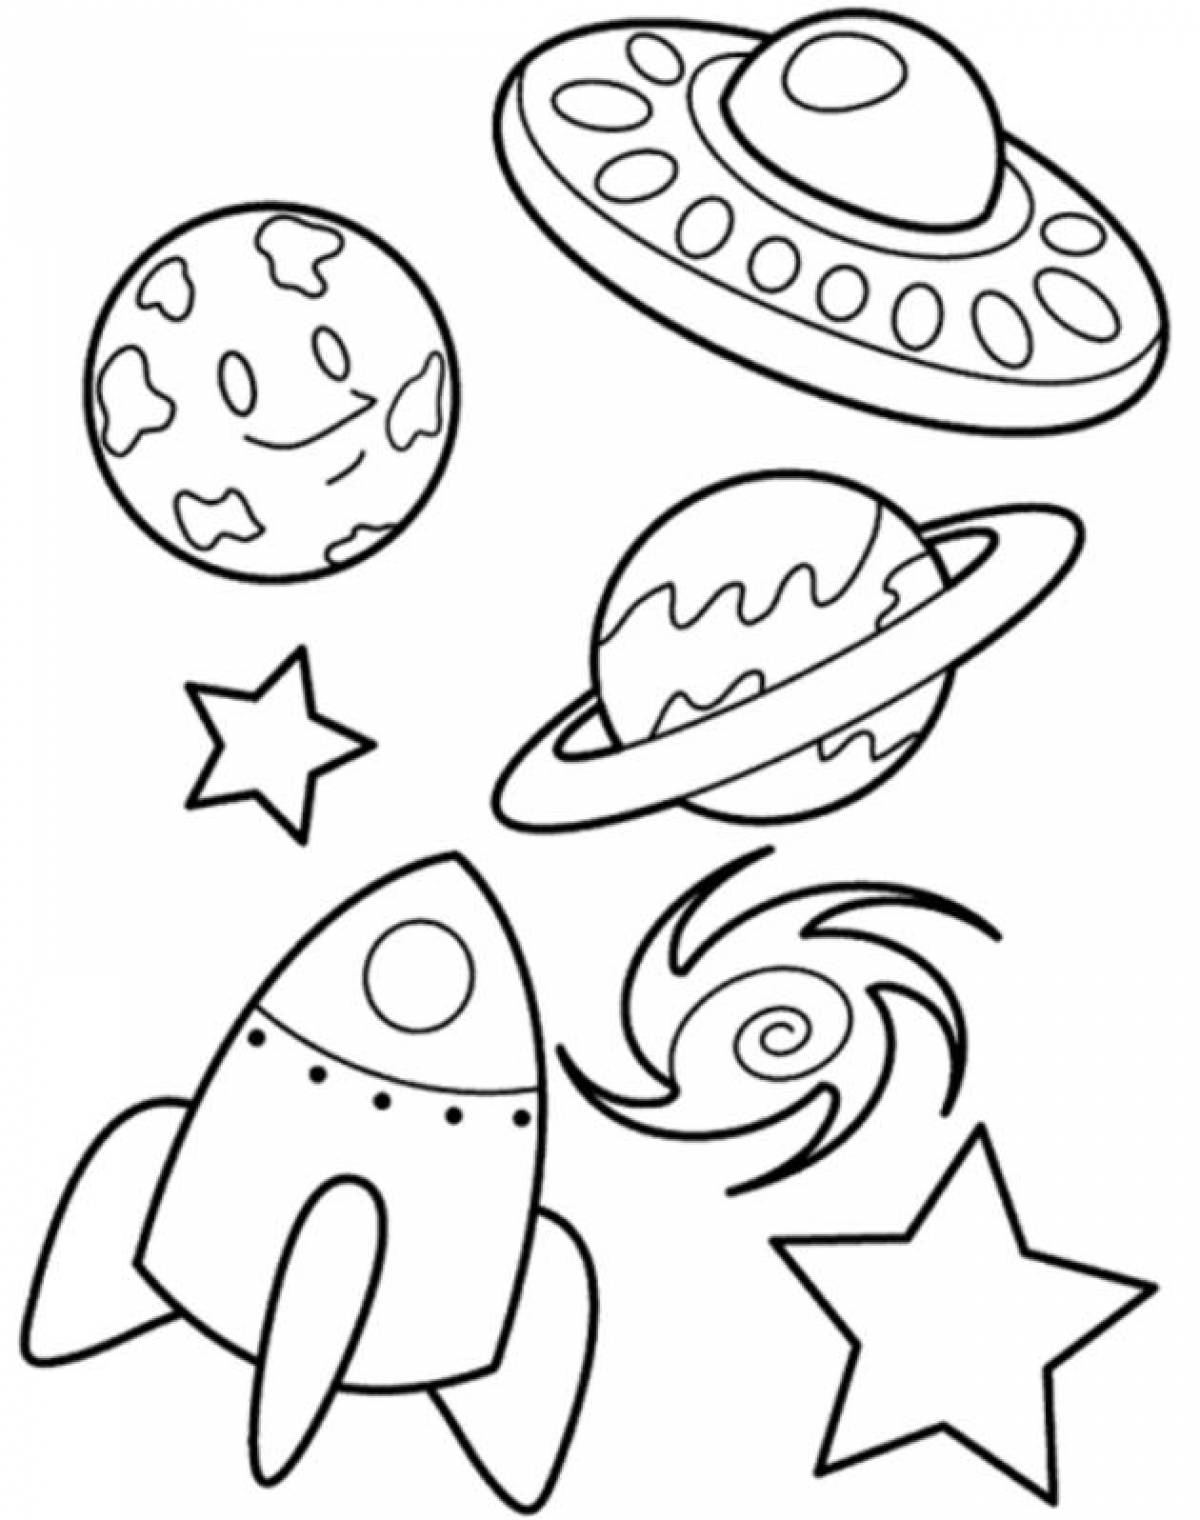 Rocket and planets